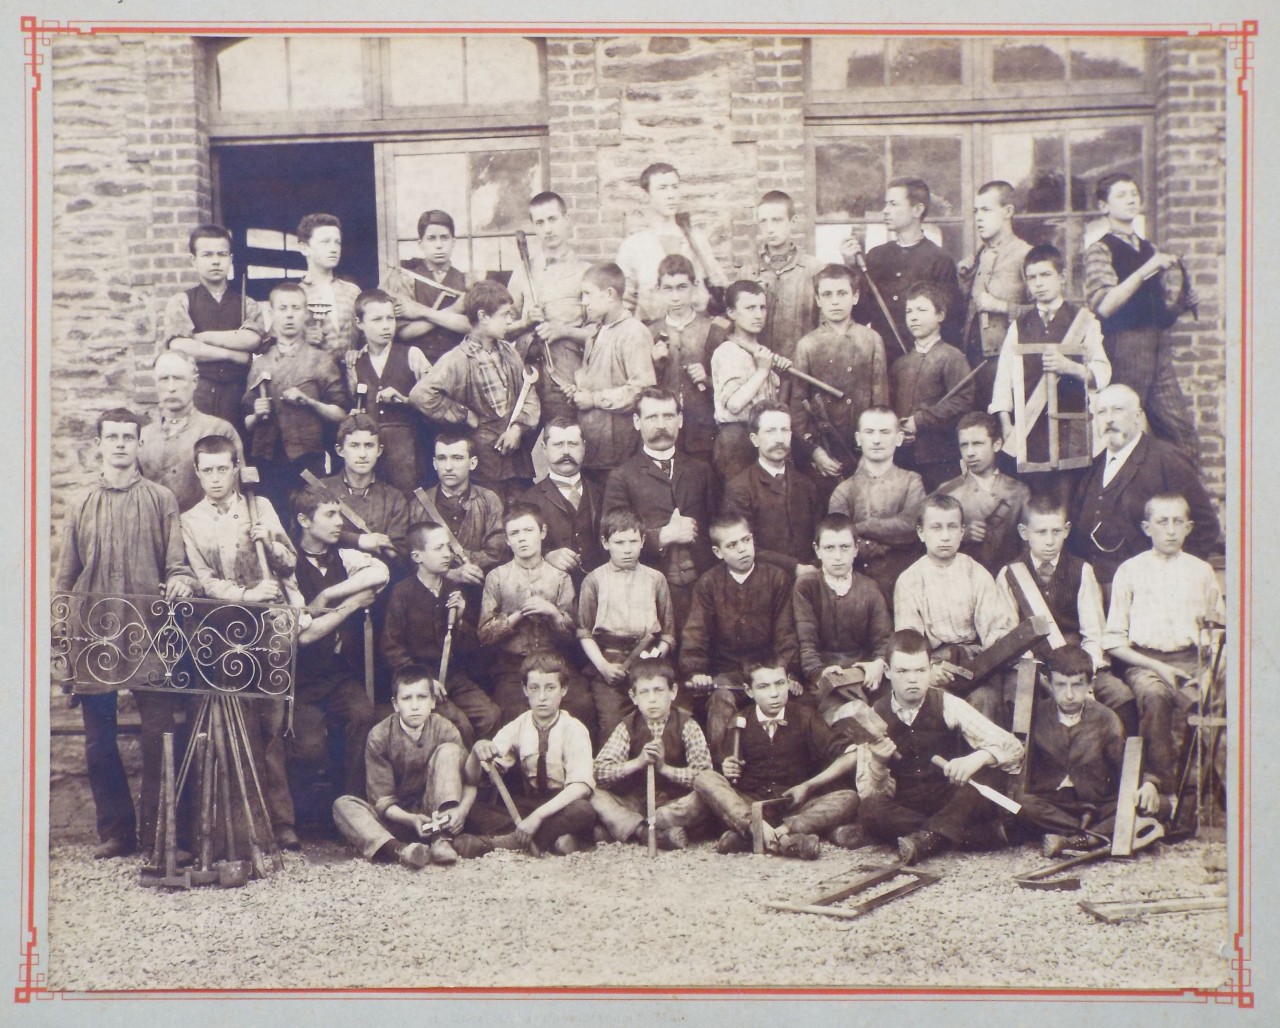 Photograph - L'ecole de l'Indus, Boulevard Laennec, Rennes, Group of staff and pupils posing with the tools of their trades c1905.